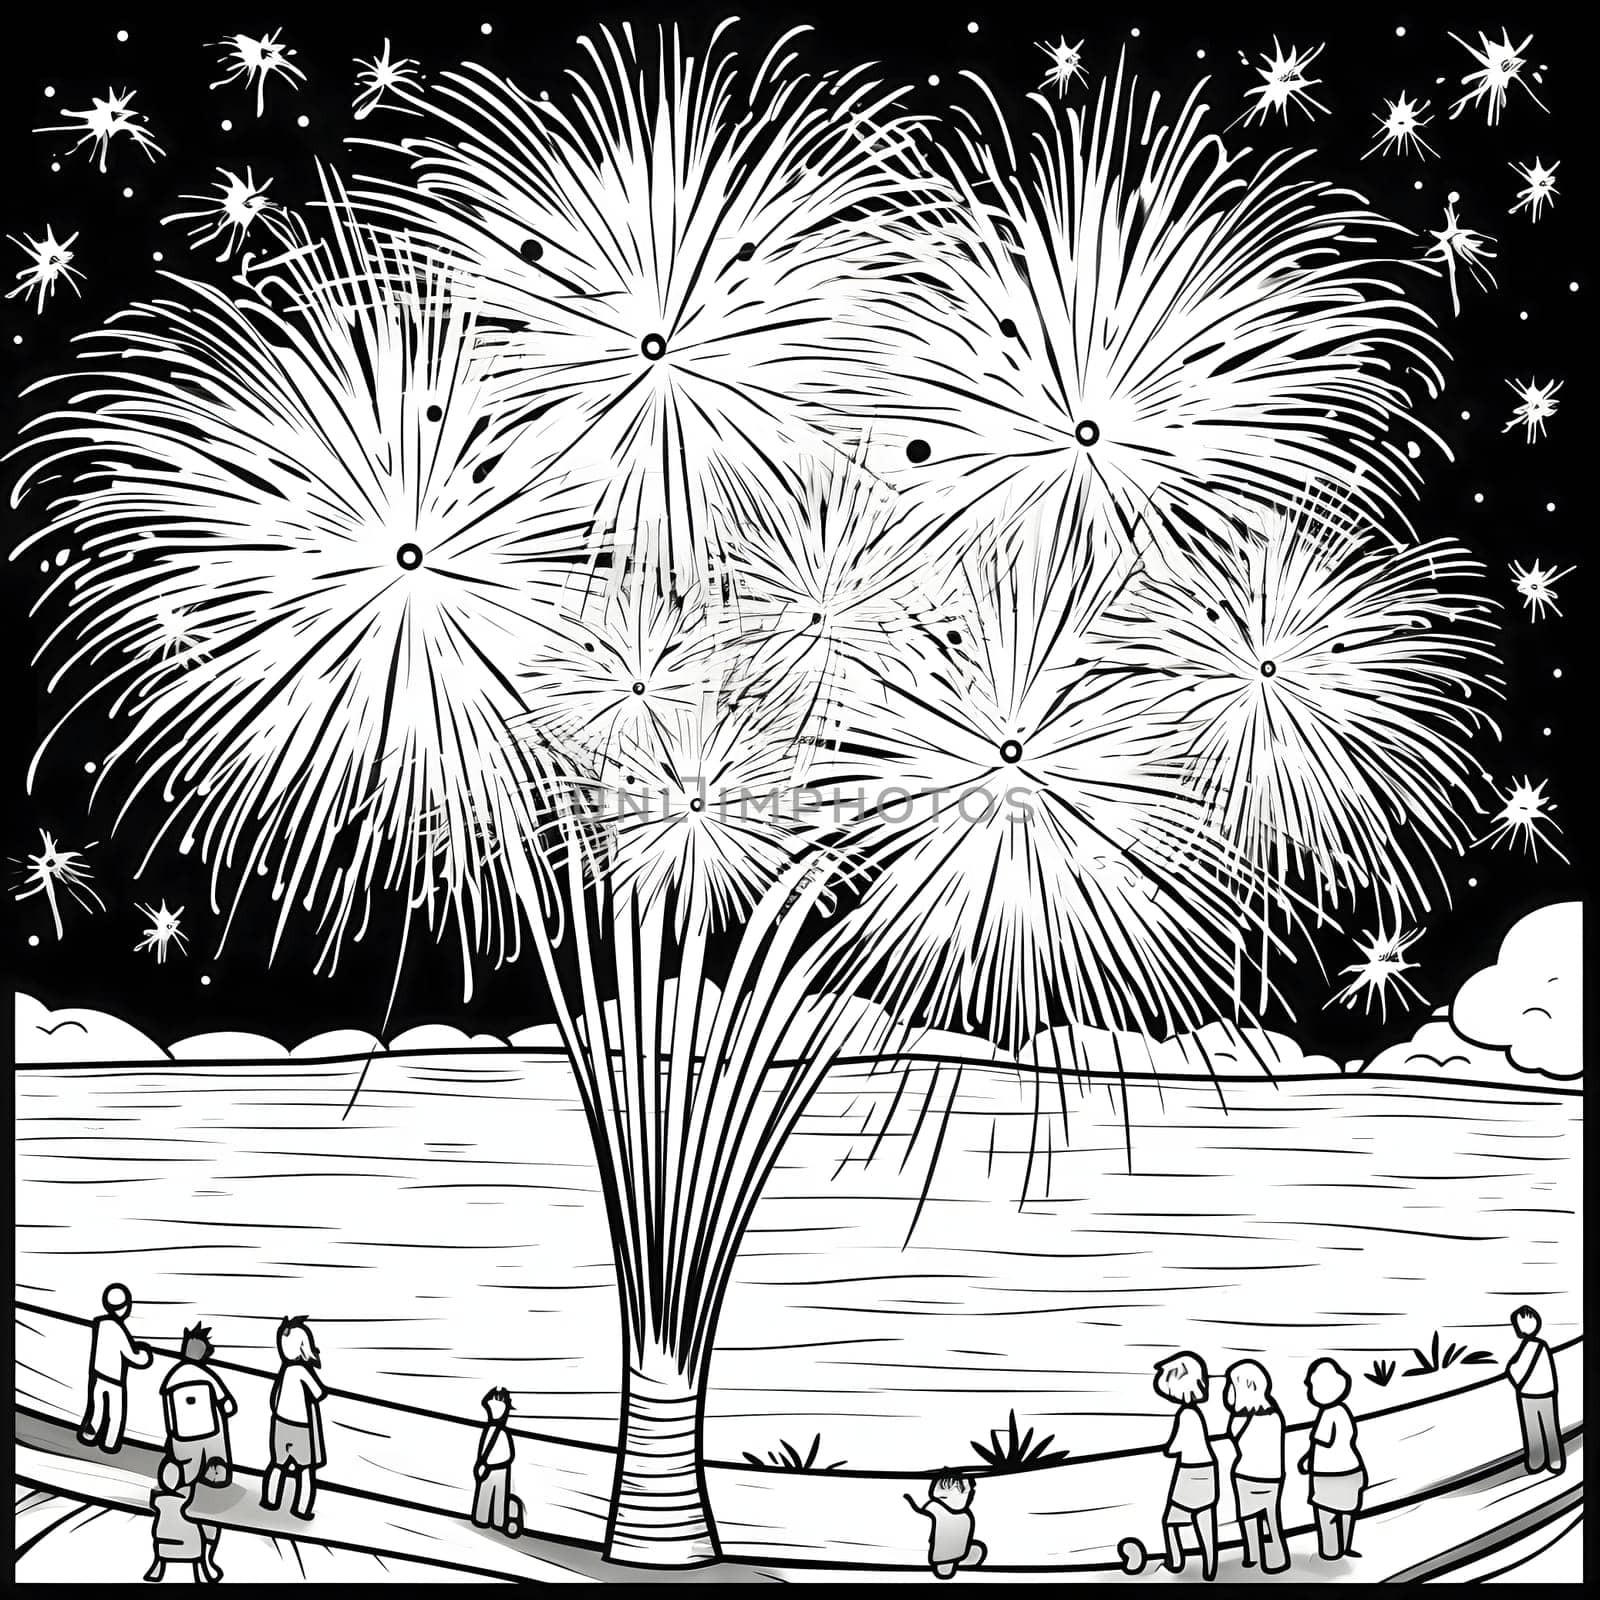 Residents watching the fireworks show. Black and white coloring sheet. New Year's fun and festivities. A time of celebration and resolutions.